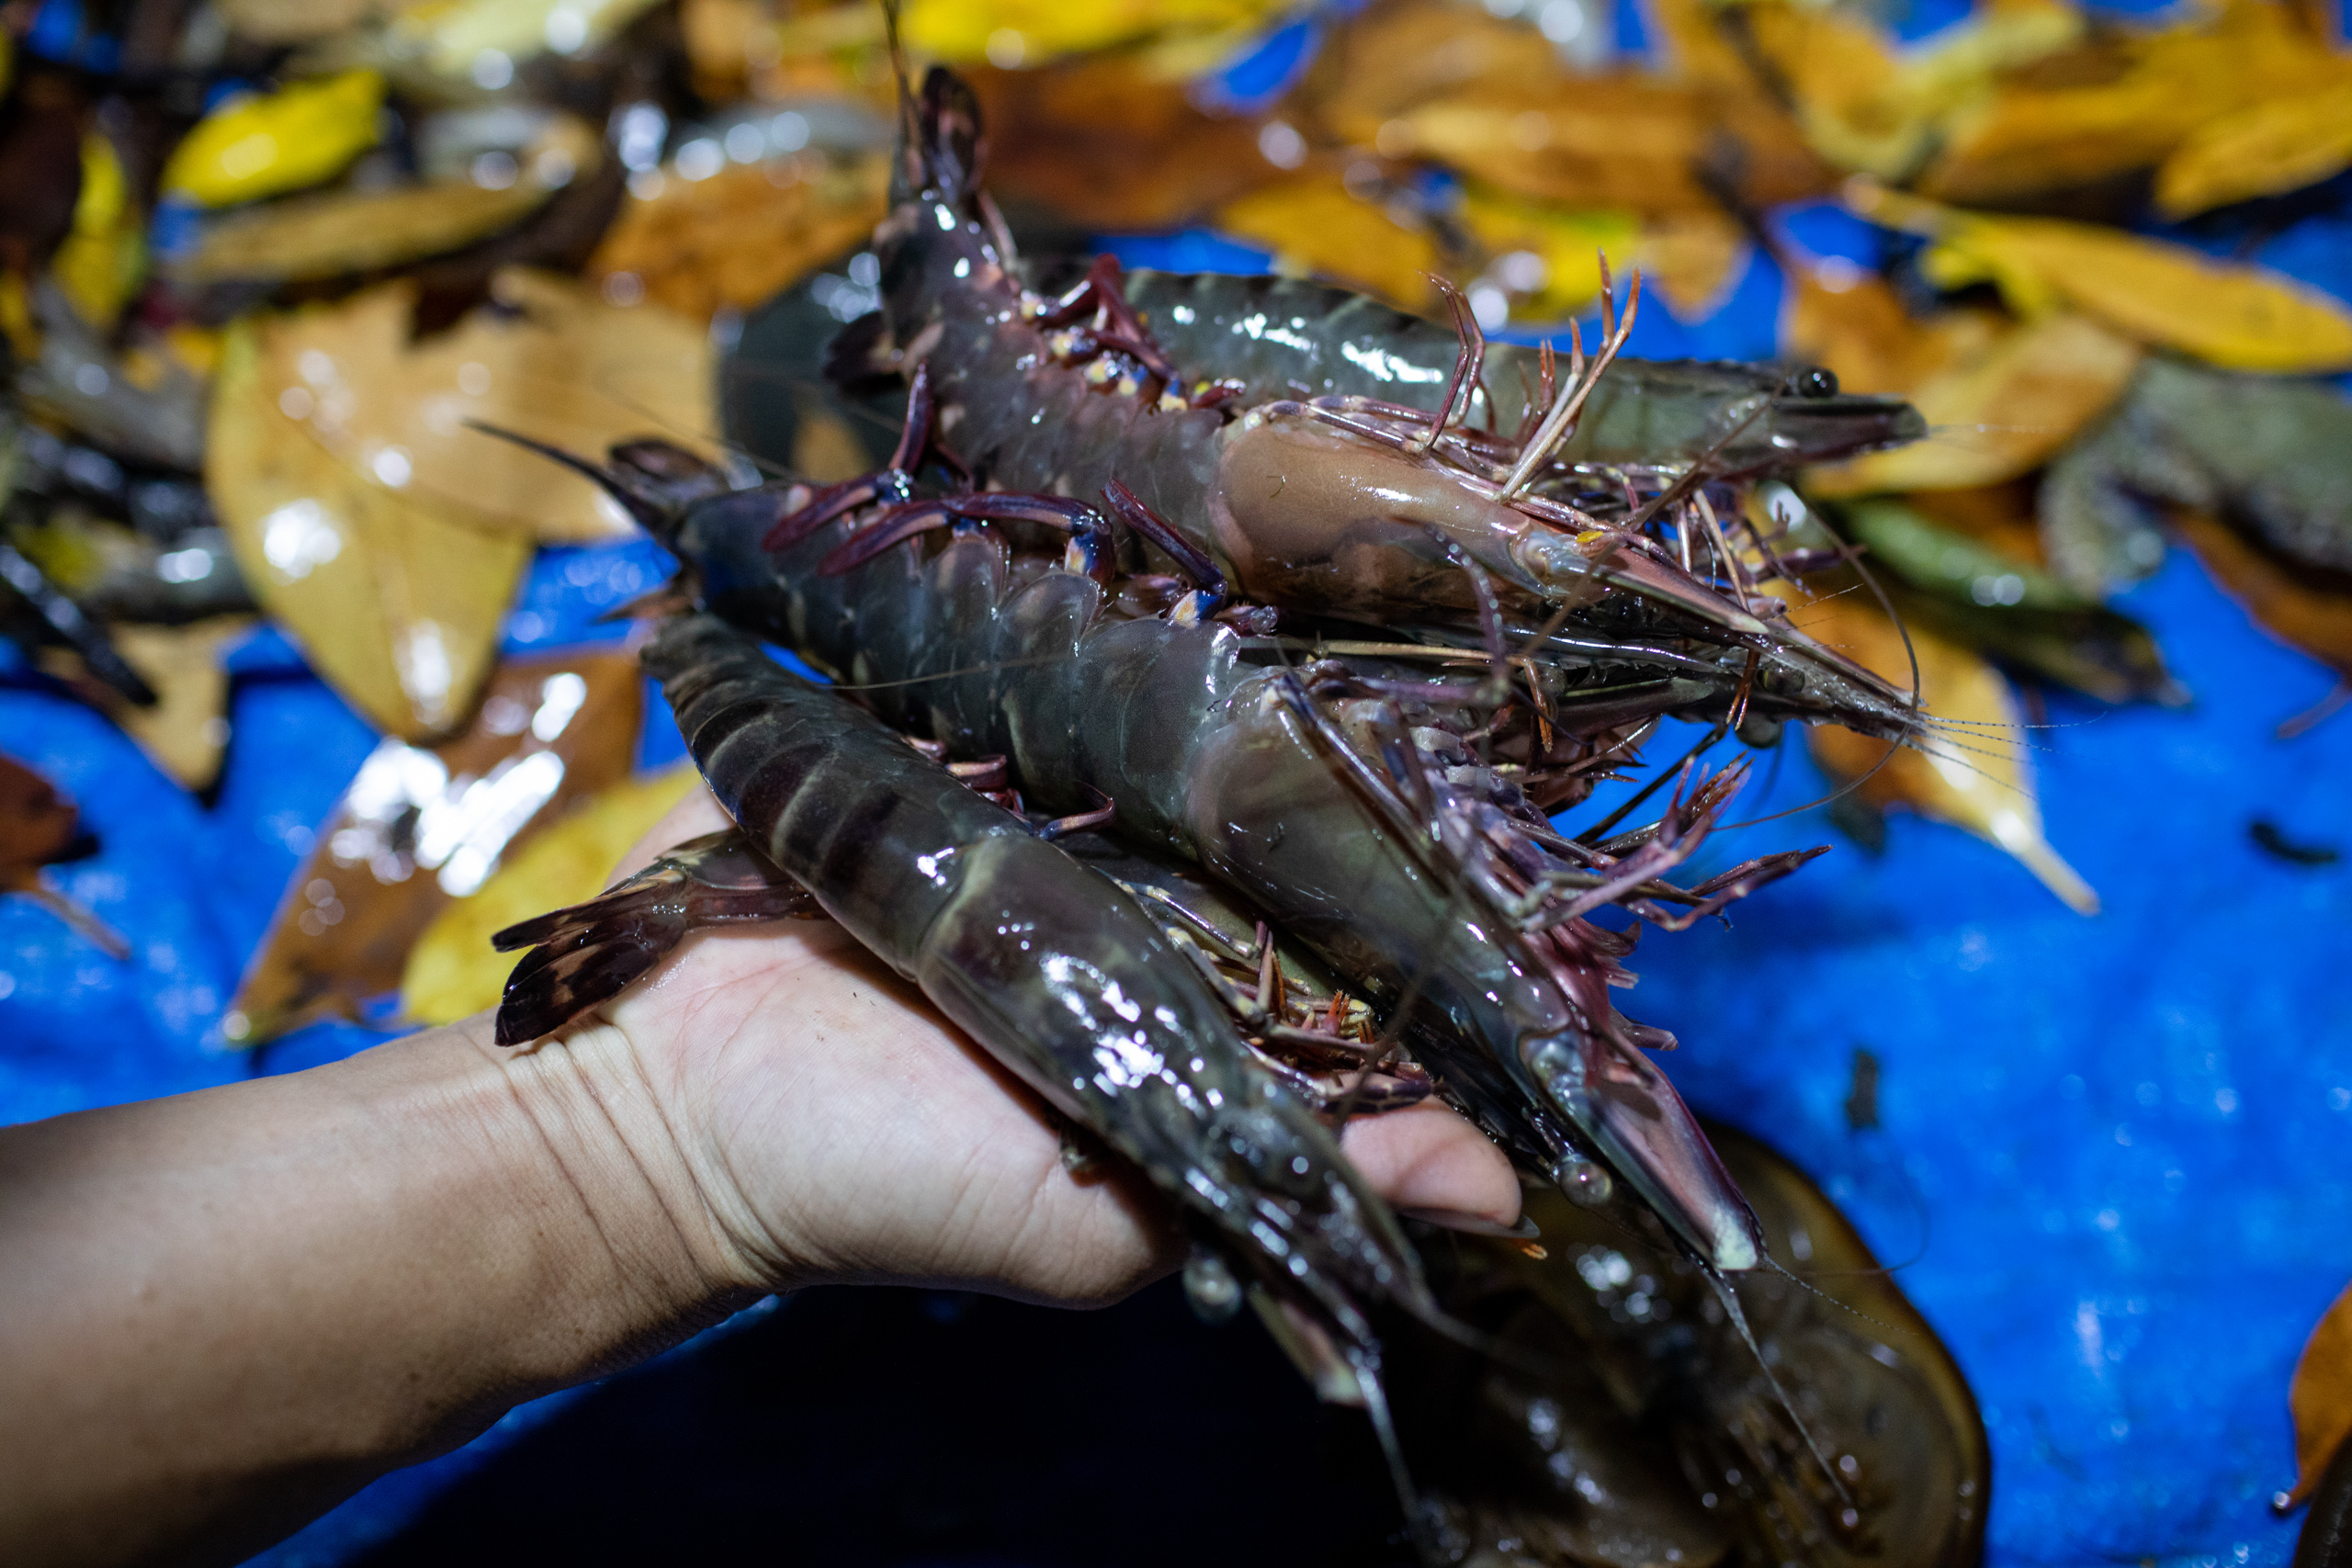 Each of these black tiger shrimps weighed around 500gram, fed purely with natural food sources in the ponds.